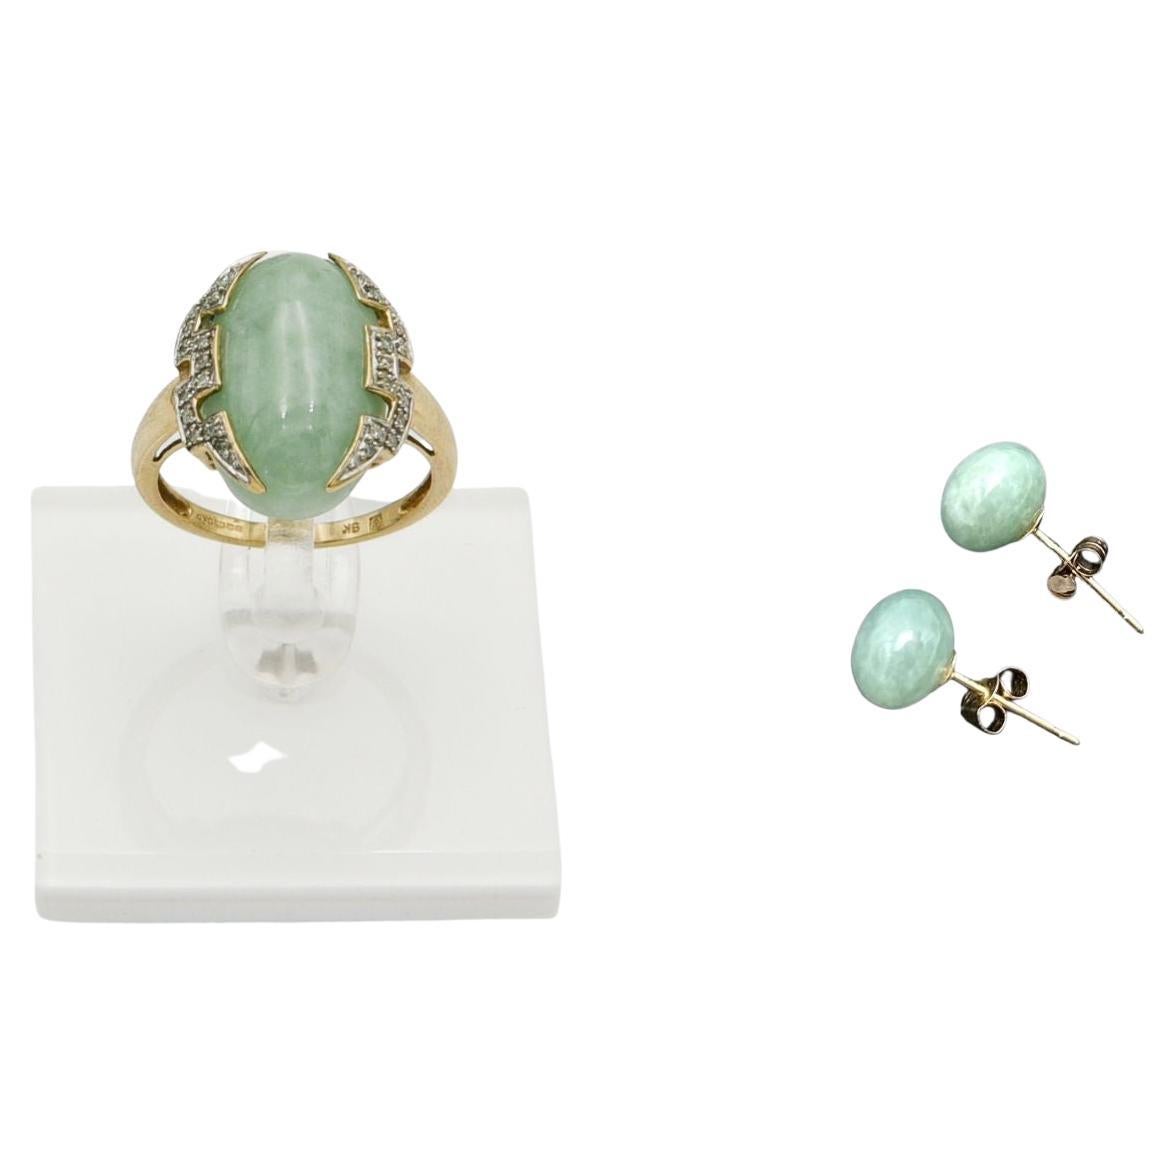 Art Deco gold ring with diamonds and jade + jade earrings, set of 3. For Sale